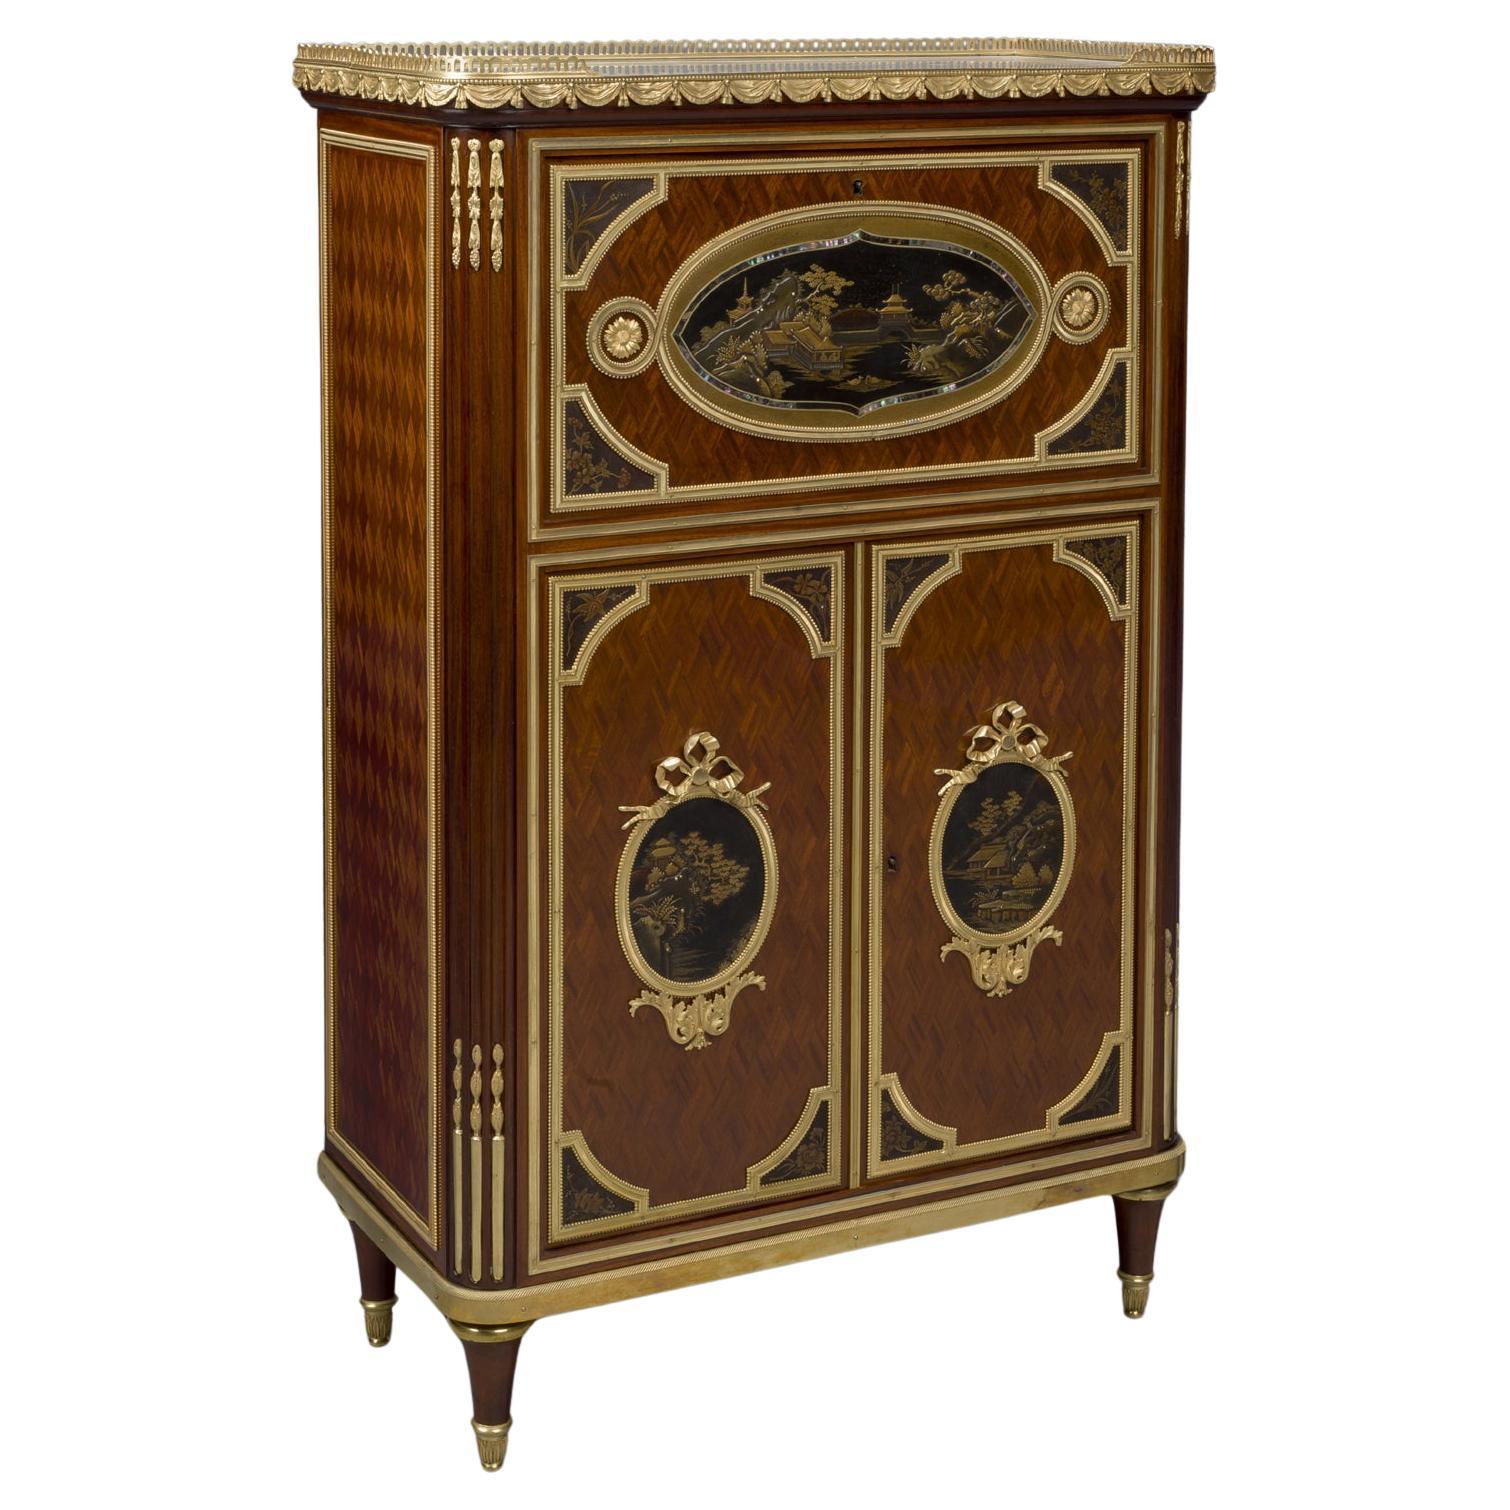 Louis XVI Style Parquetry, Gilt-Bronze and Lacquer Mounted Petit Secretaire Cabi